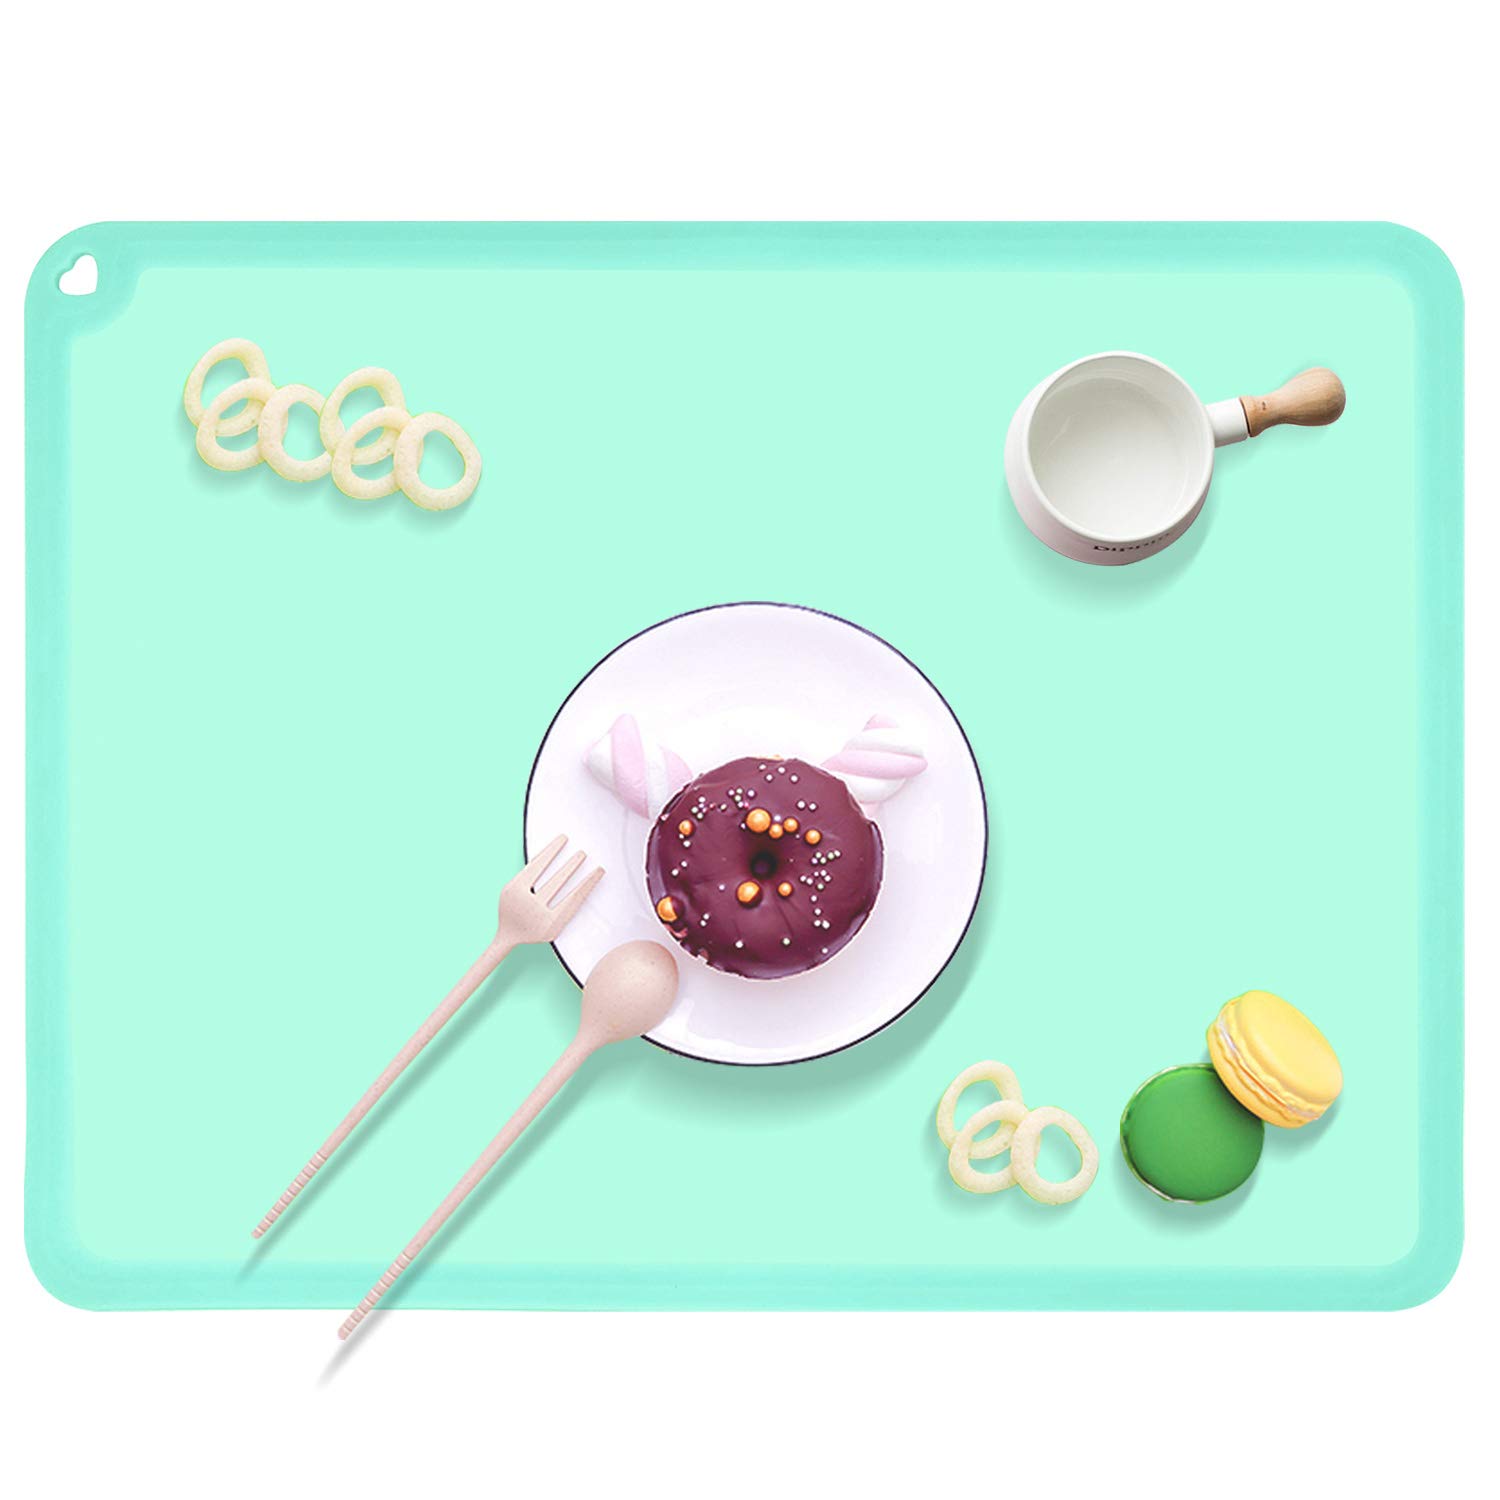 Be A Heart Silicone Placemats for Kids and Toddlers, BPA-Free Non